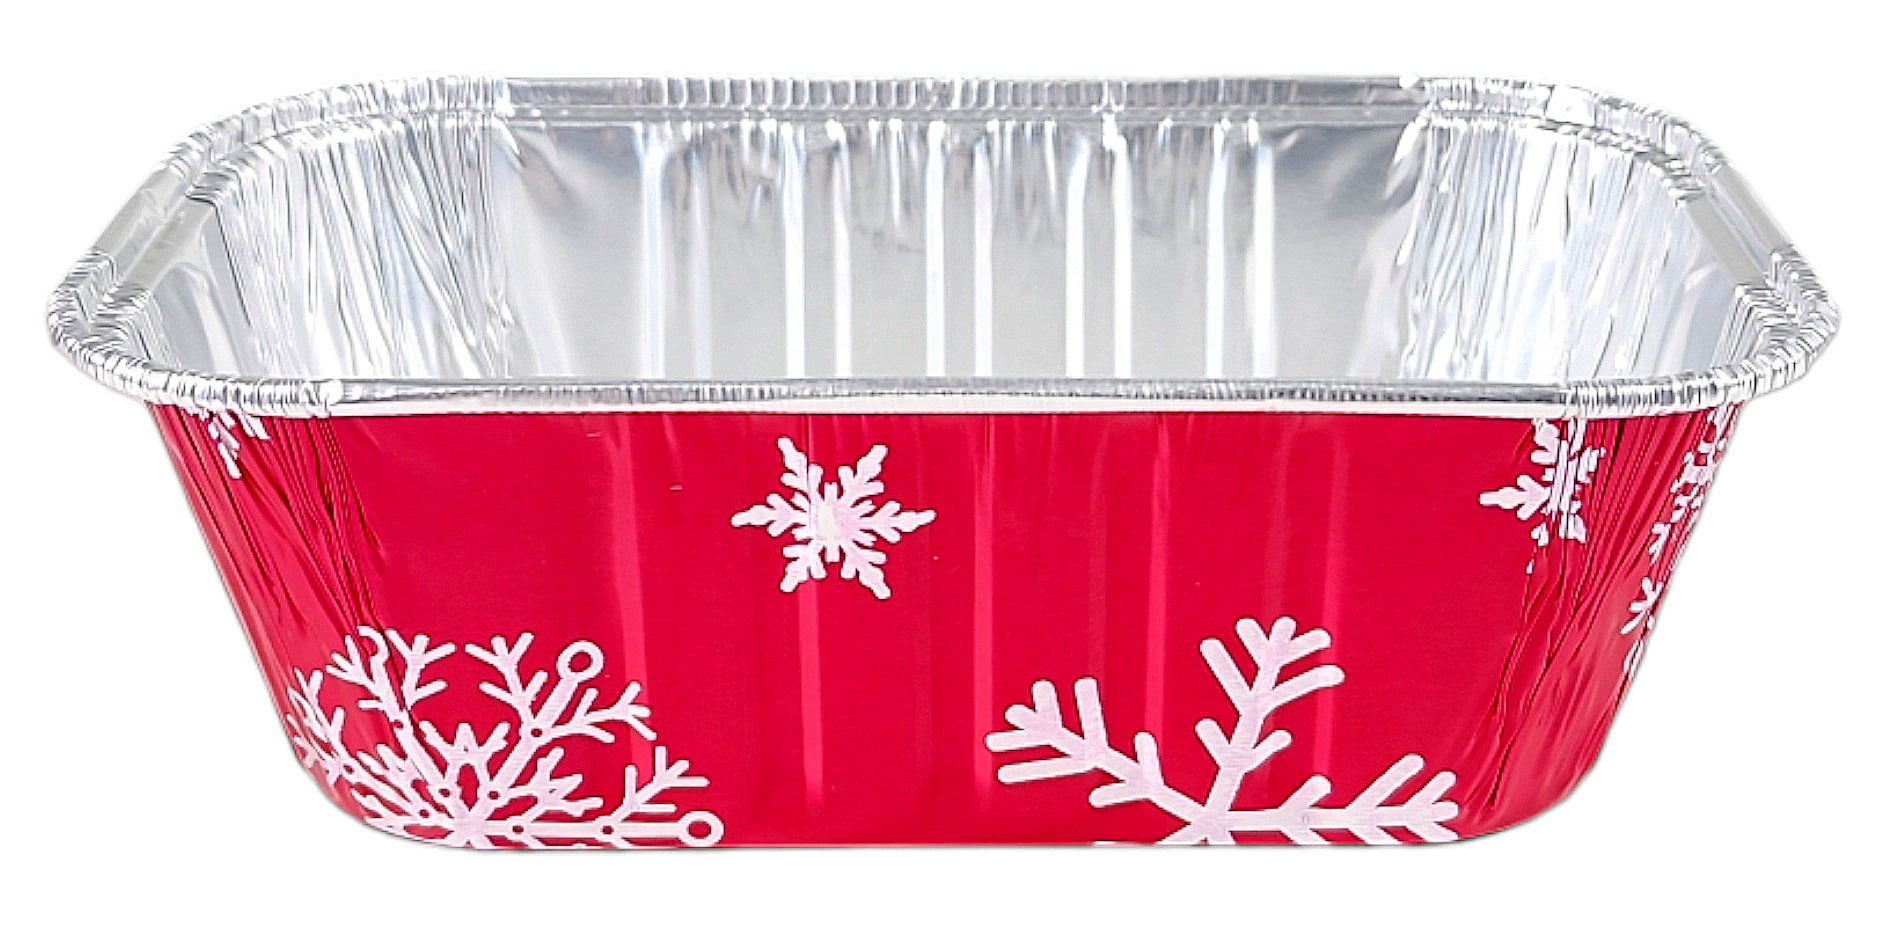 Pactogo 1 lb. Red Aluminum Foil Holiday Mini-Loaf Snowflake Pan w/Clea –